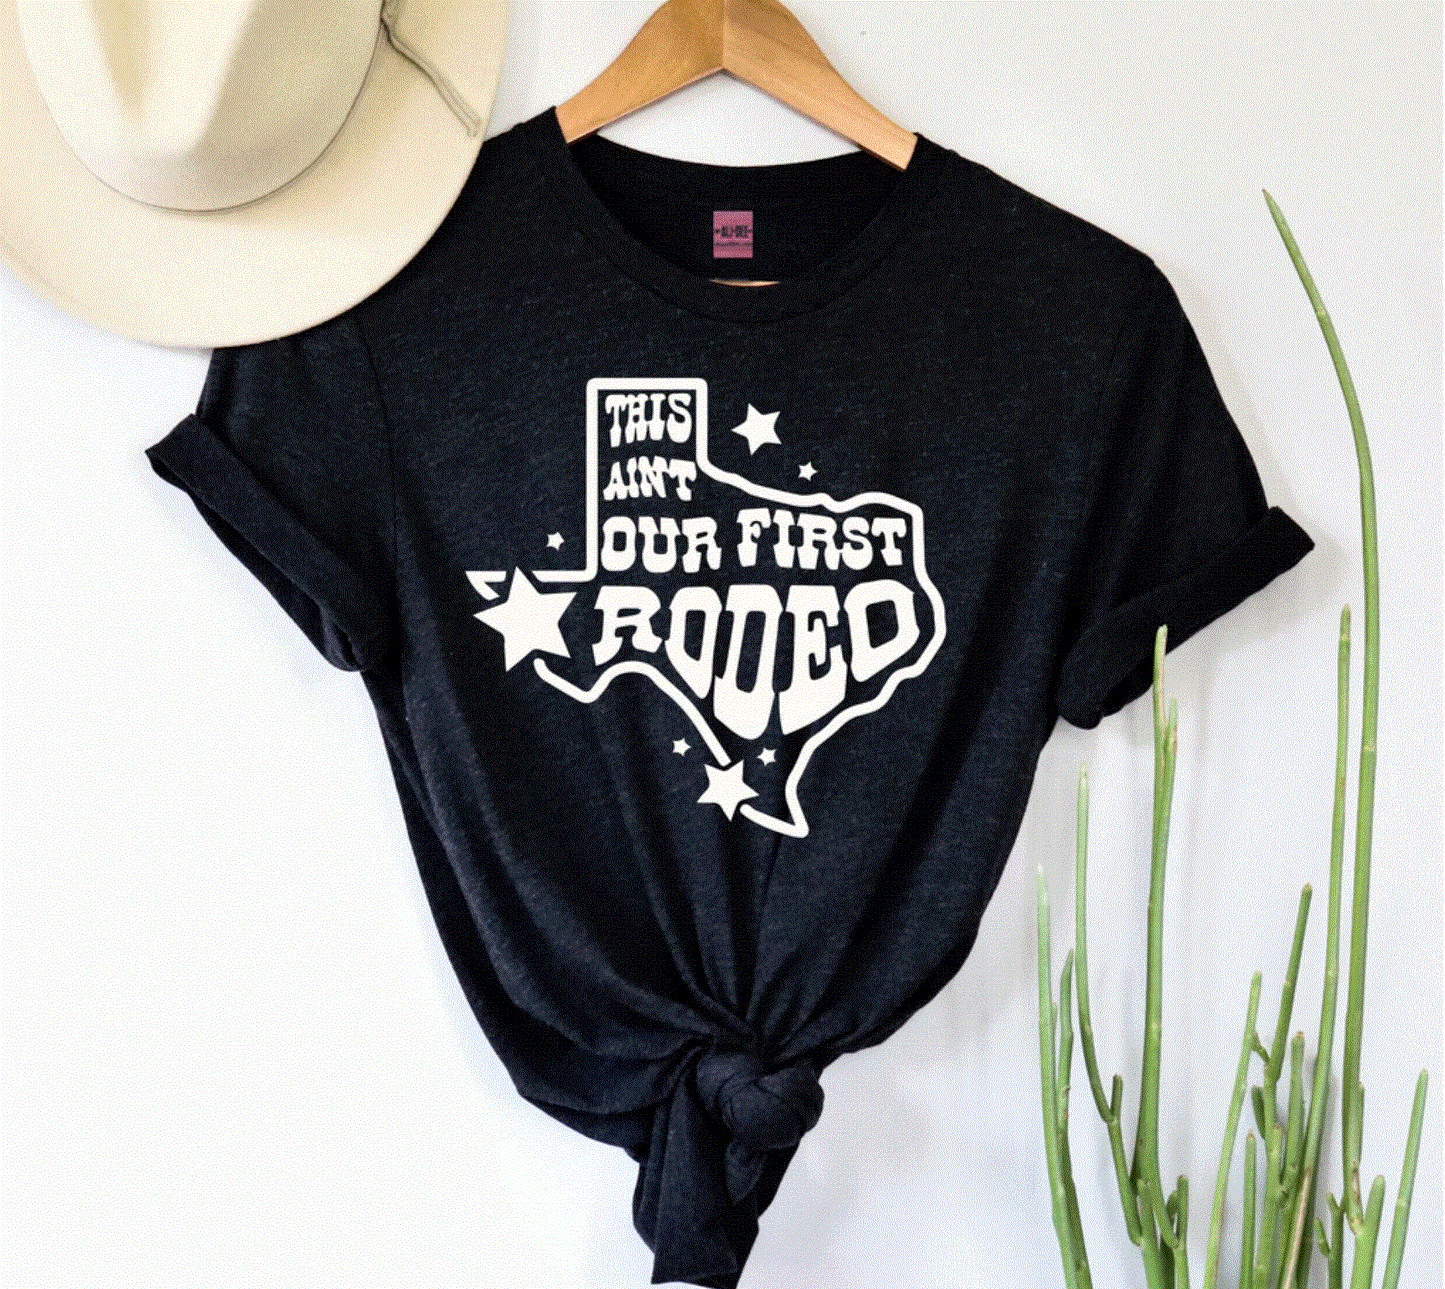 ALI617 Ain't our first Rodeo Tee